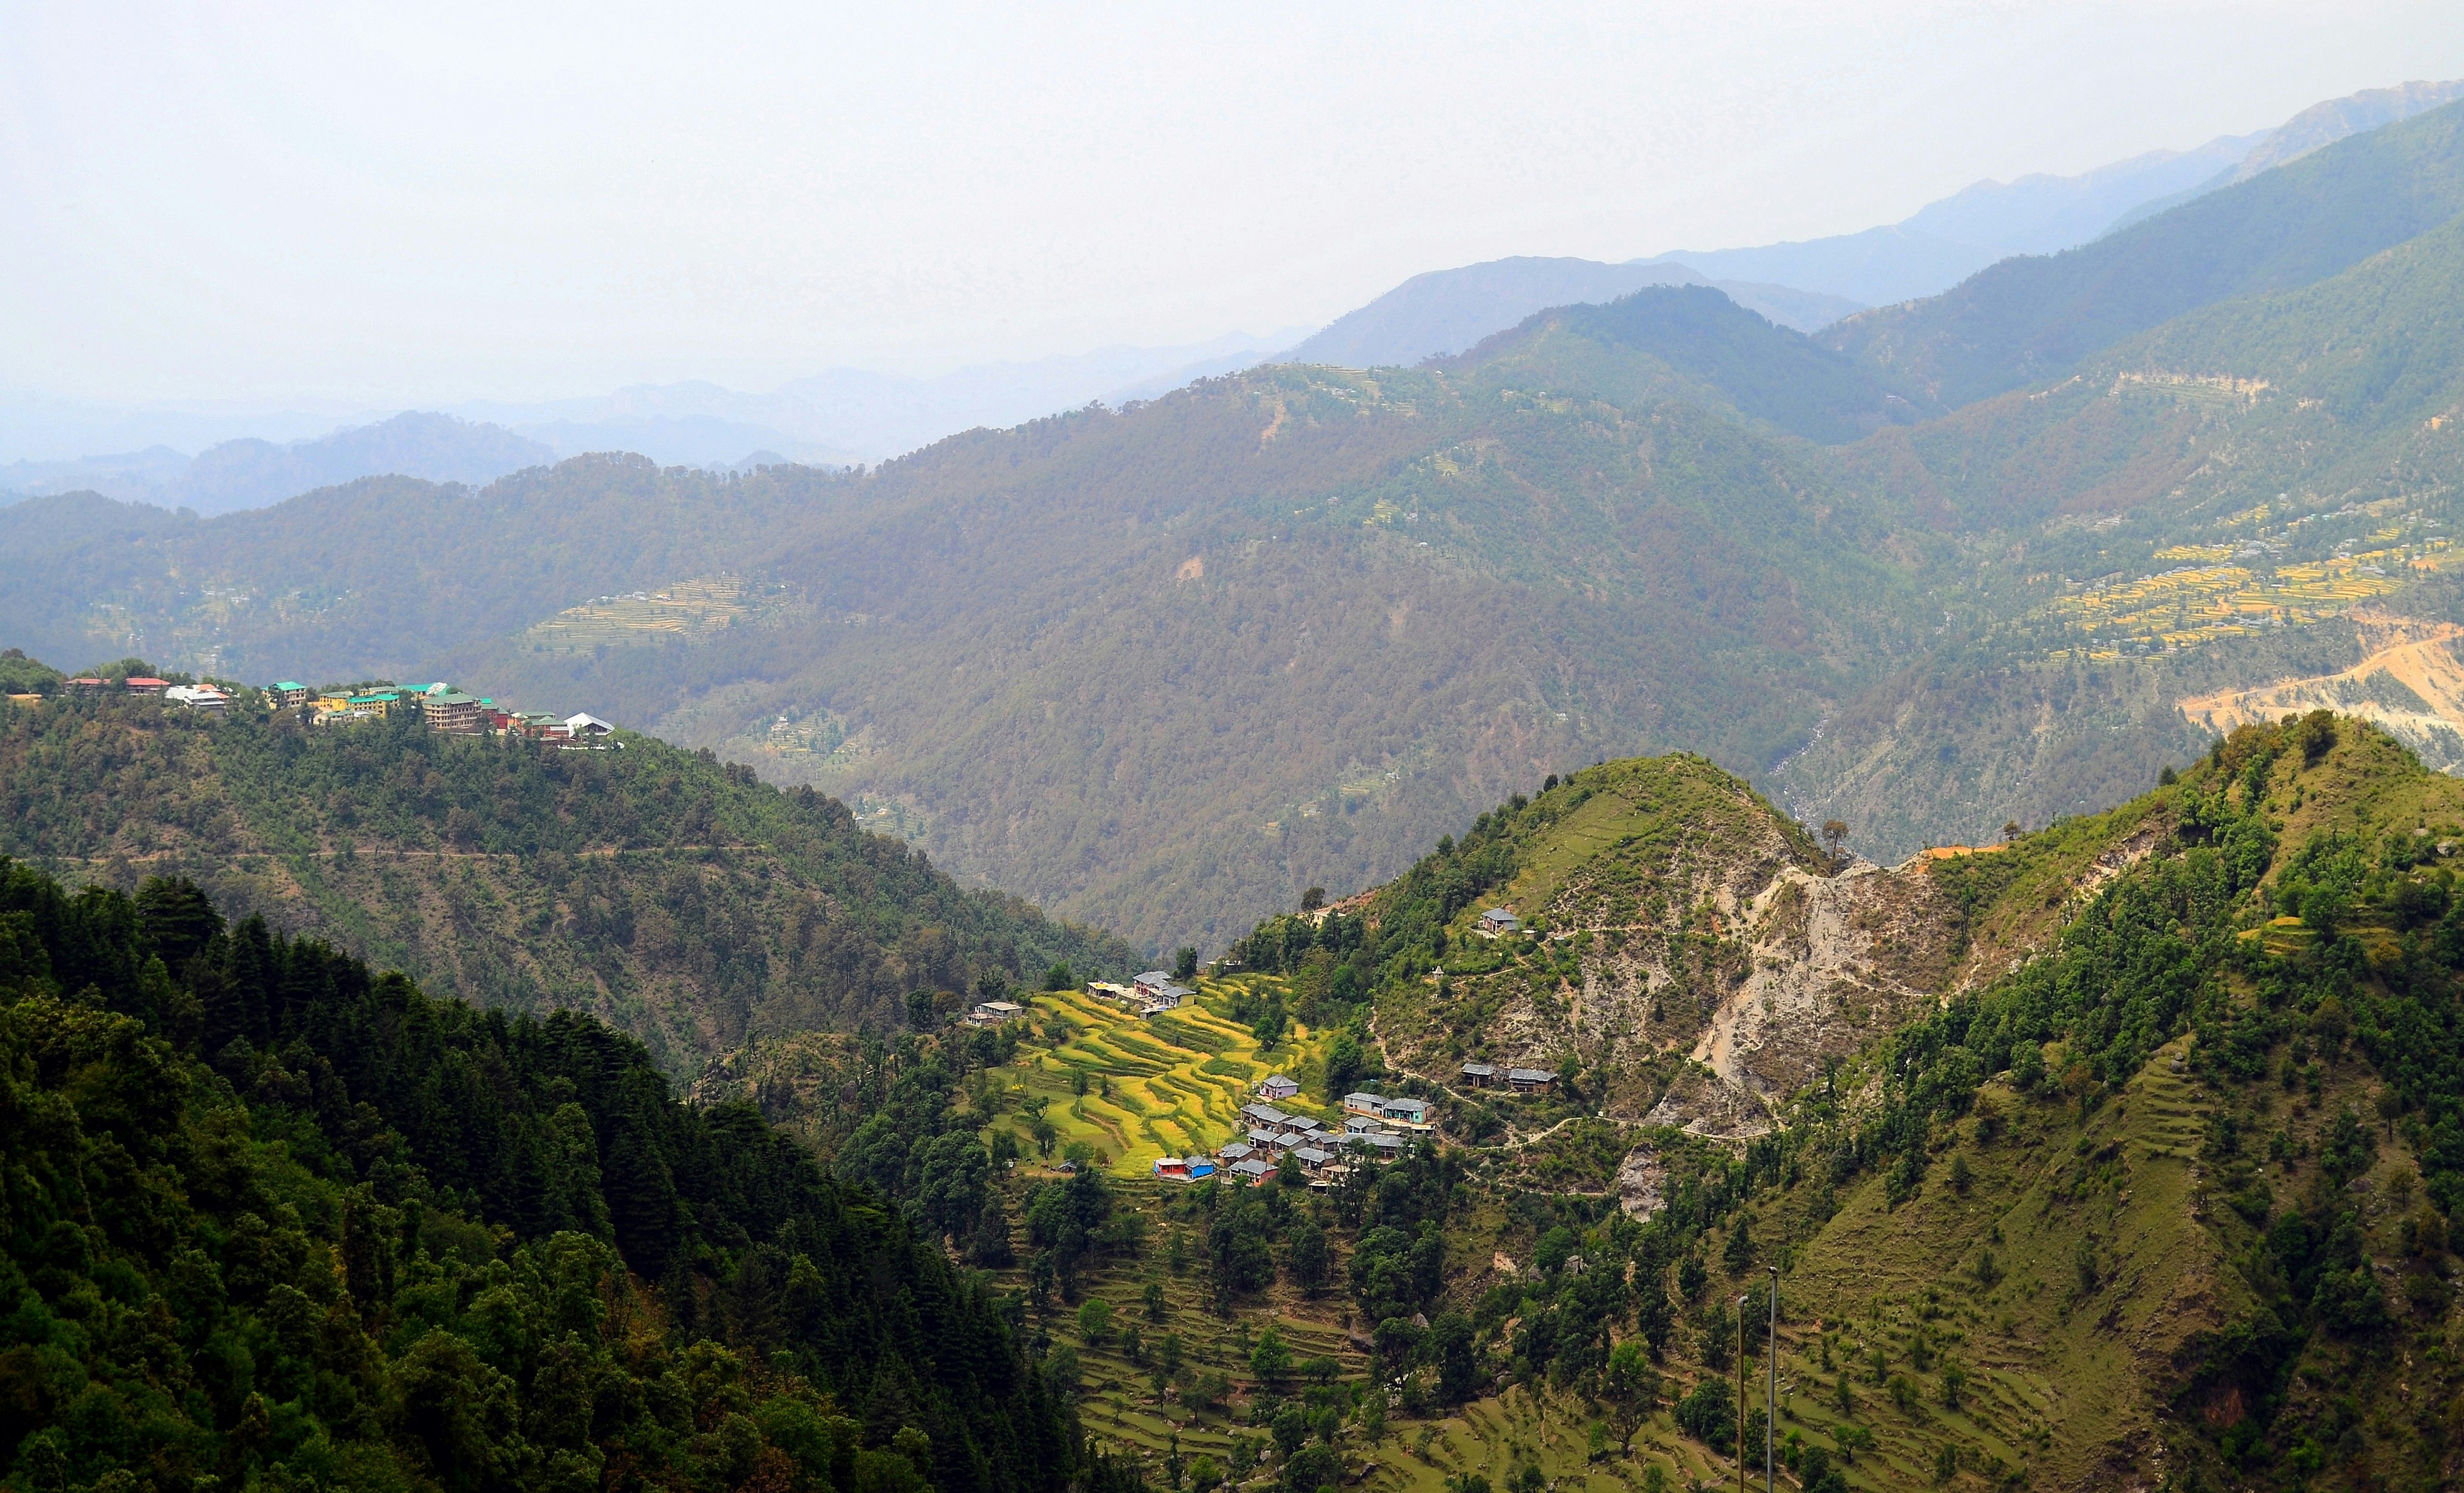 A sweeping view of the rolling hills of the Kangra Valley with a village on the side of a mountain visible in the foreground.